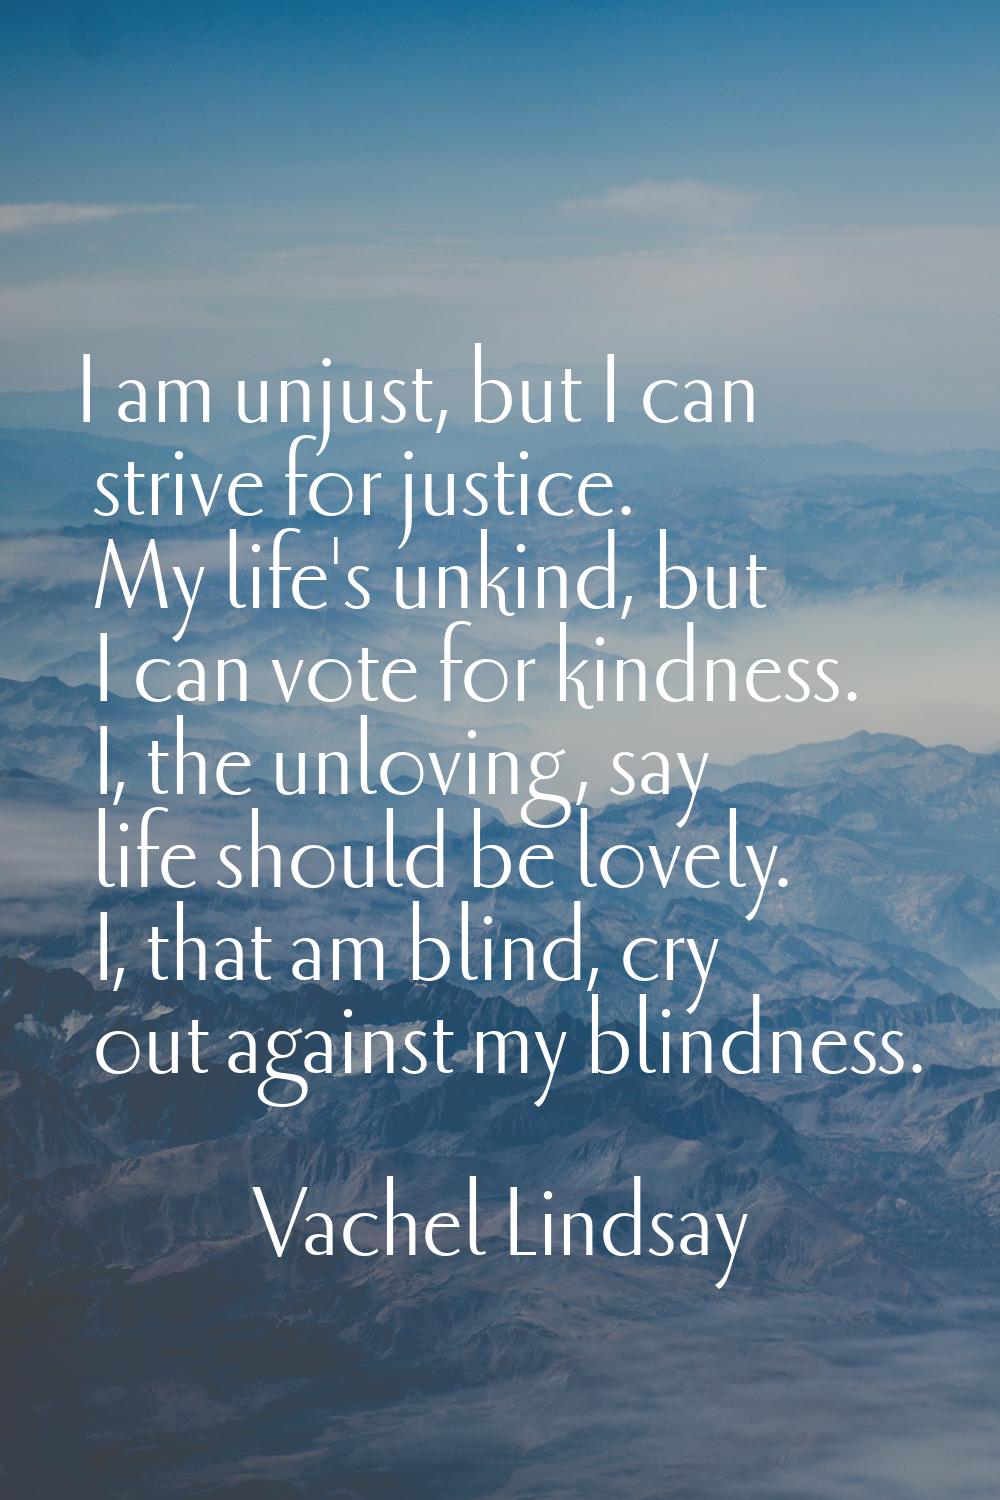 I am unjust, but I can strive for justice. My life's unkind, but I can vote for kindness. I, the un